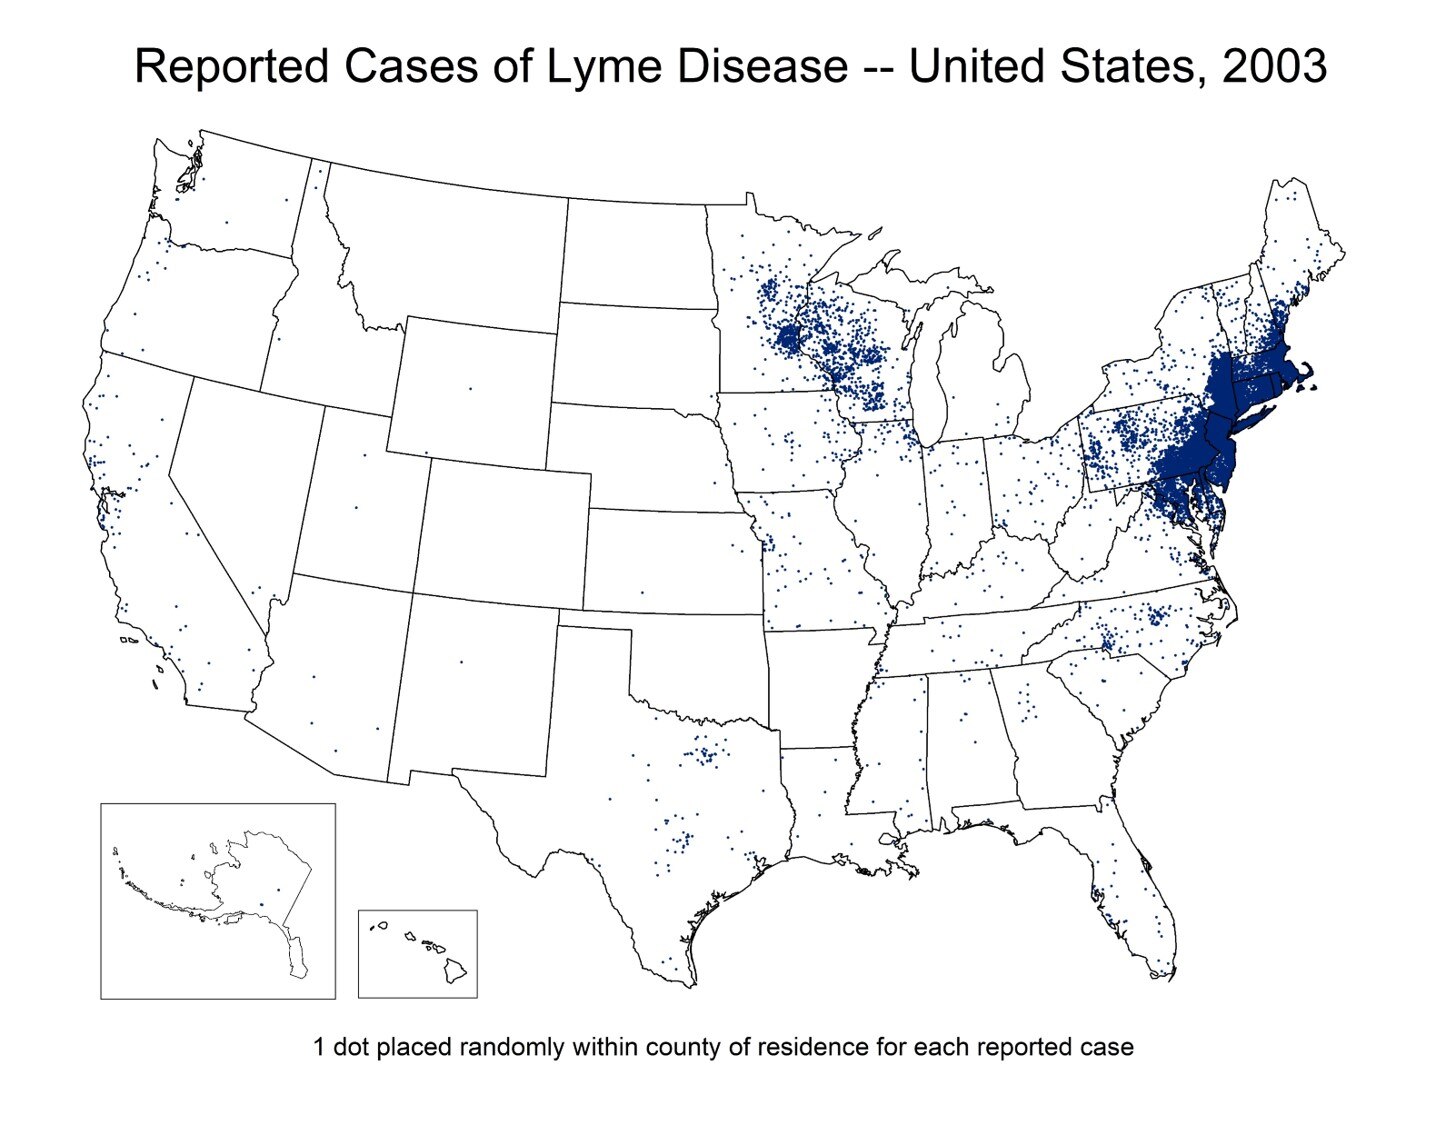 Reported Cases of Lyme Disease Distribution in 2003